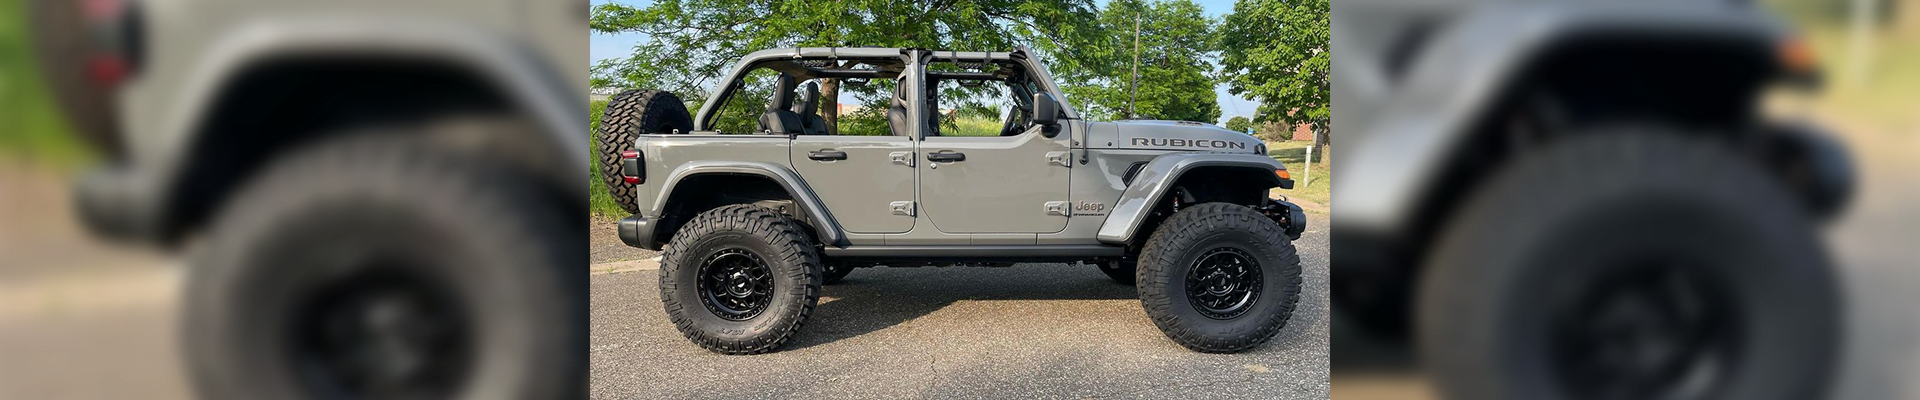 Jeep Rubicon Gallery image 2